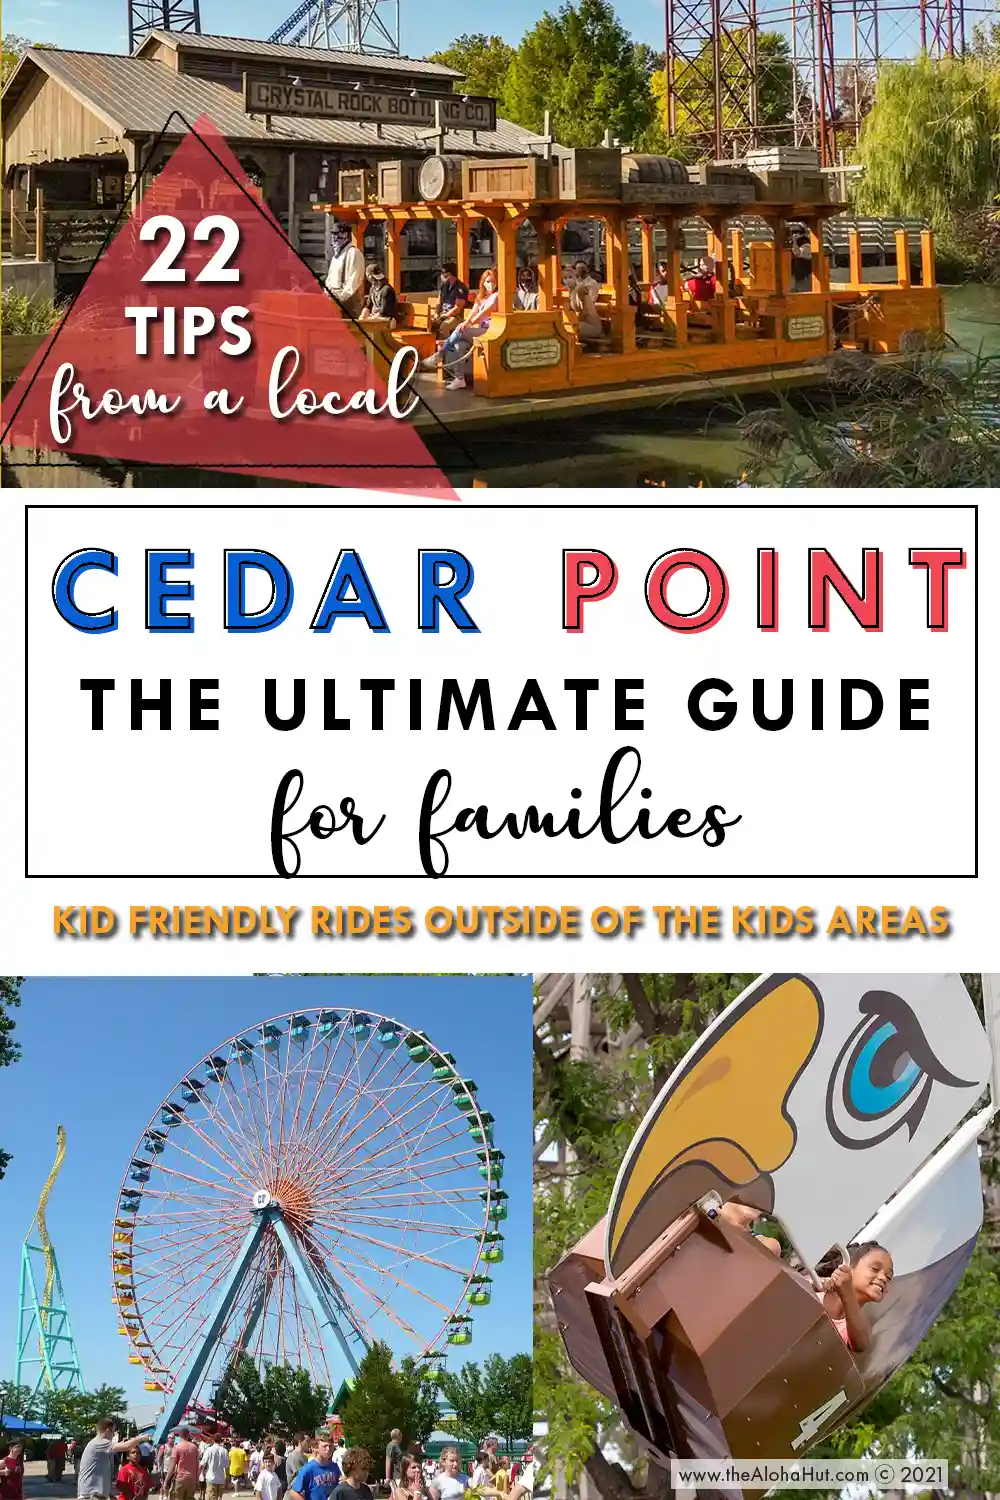 Cedar Point the Ultimate Guide for Families - Tips & Tricks -Toddler Friendly Rides